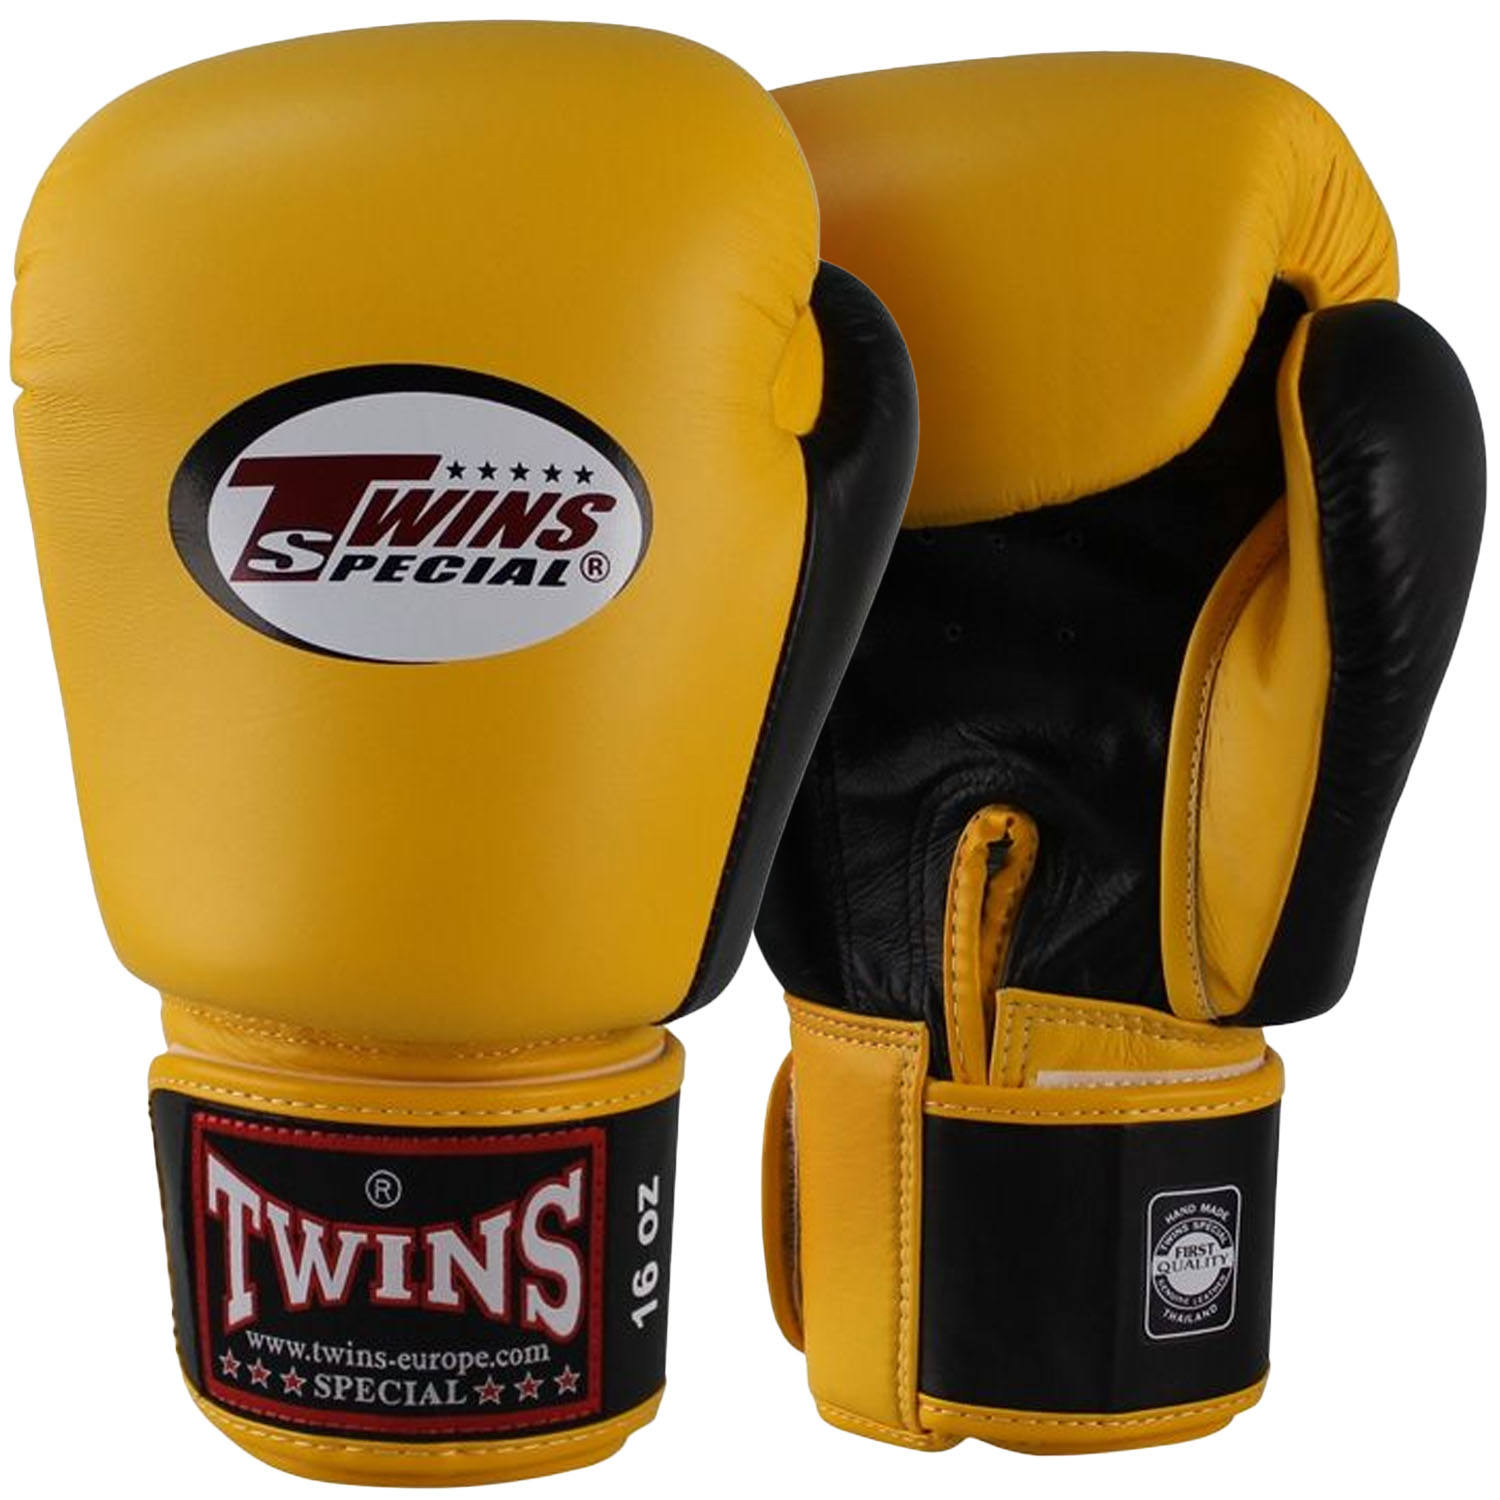 TWINS Special Boxing Gloves, Leather, BGVL-3, yellow-black